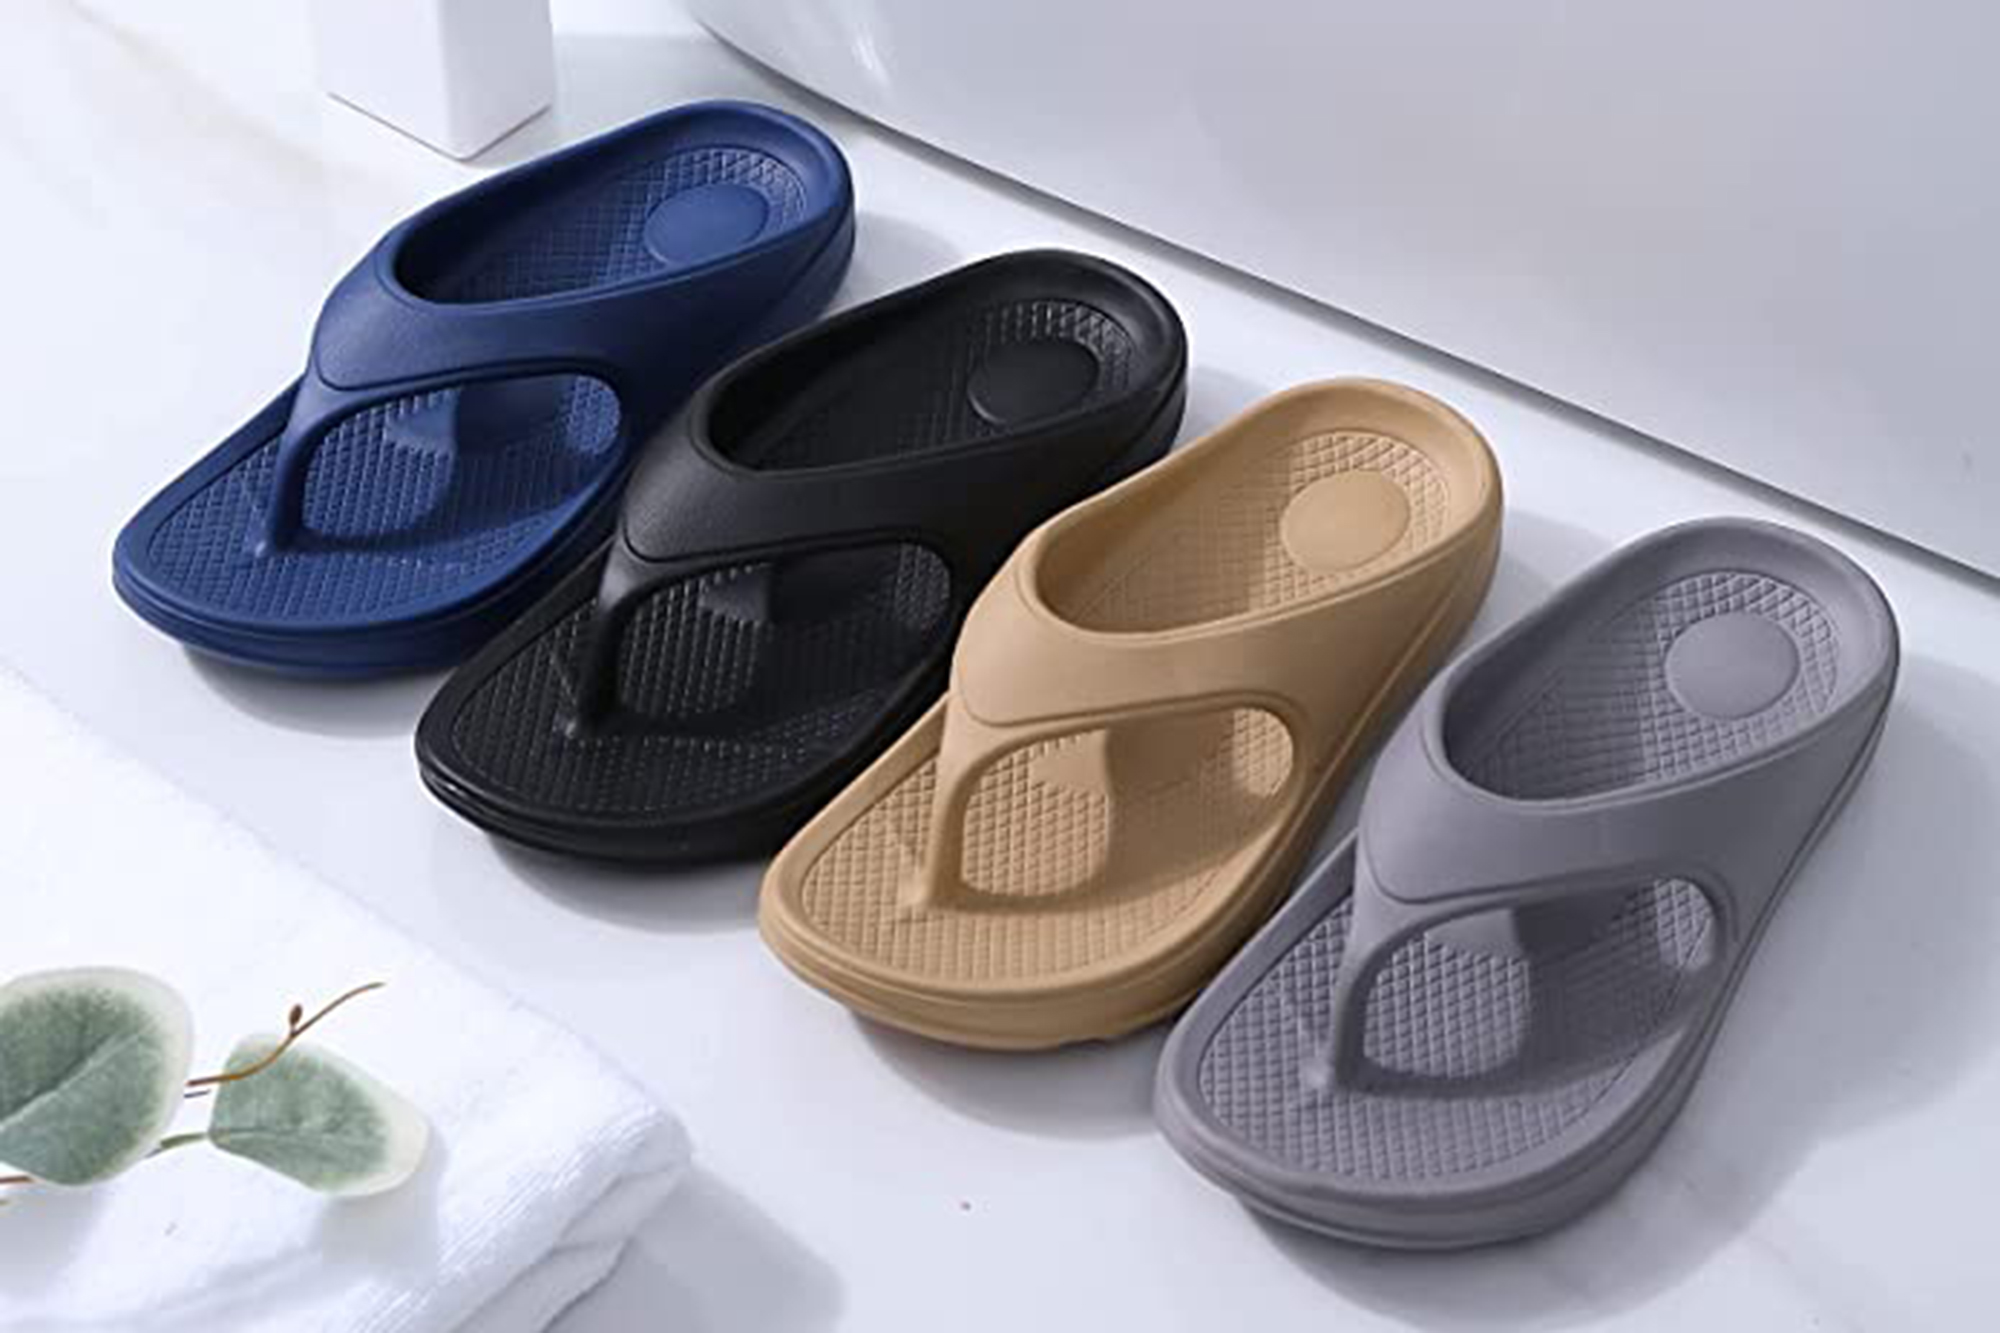 Shop These Orthopedic Flip-Flops That Relieve Foot Pain